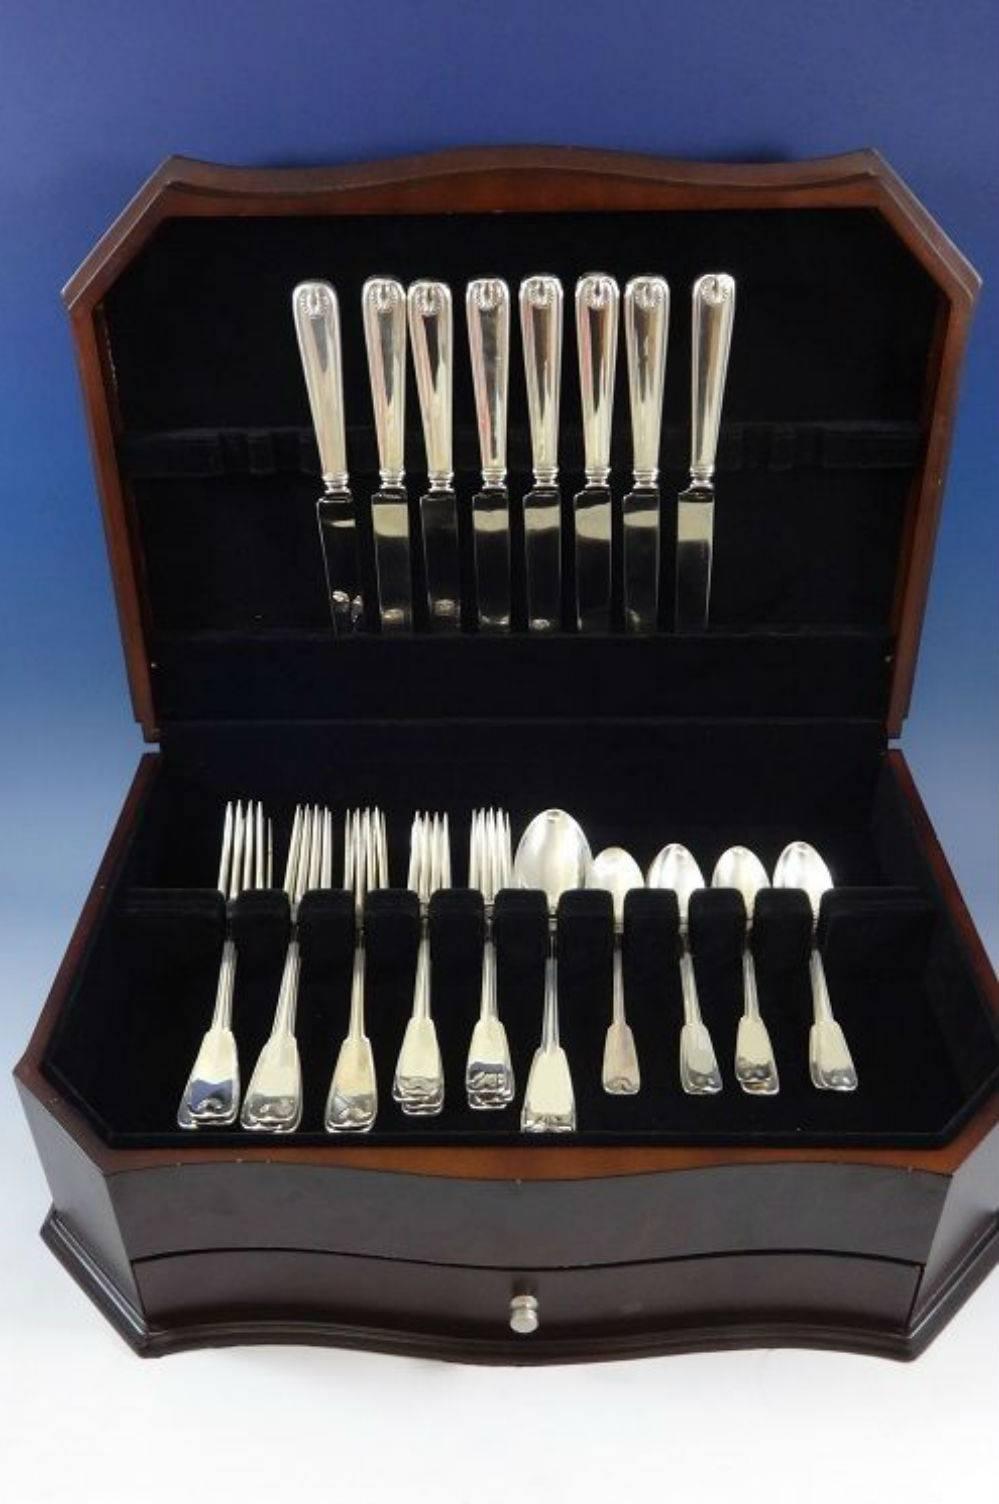 Palm by Tiffany & Co. sterling silver flatware set, 33 pieces. This set includes: 

Eight dinner size knives with stainless blades, 10 1/8